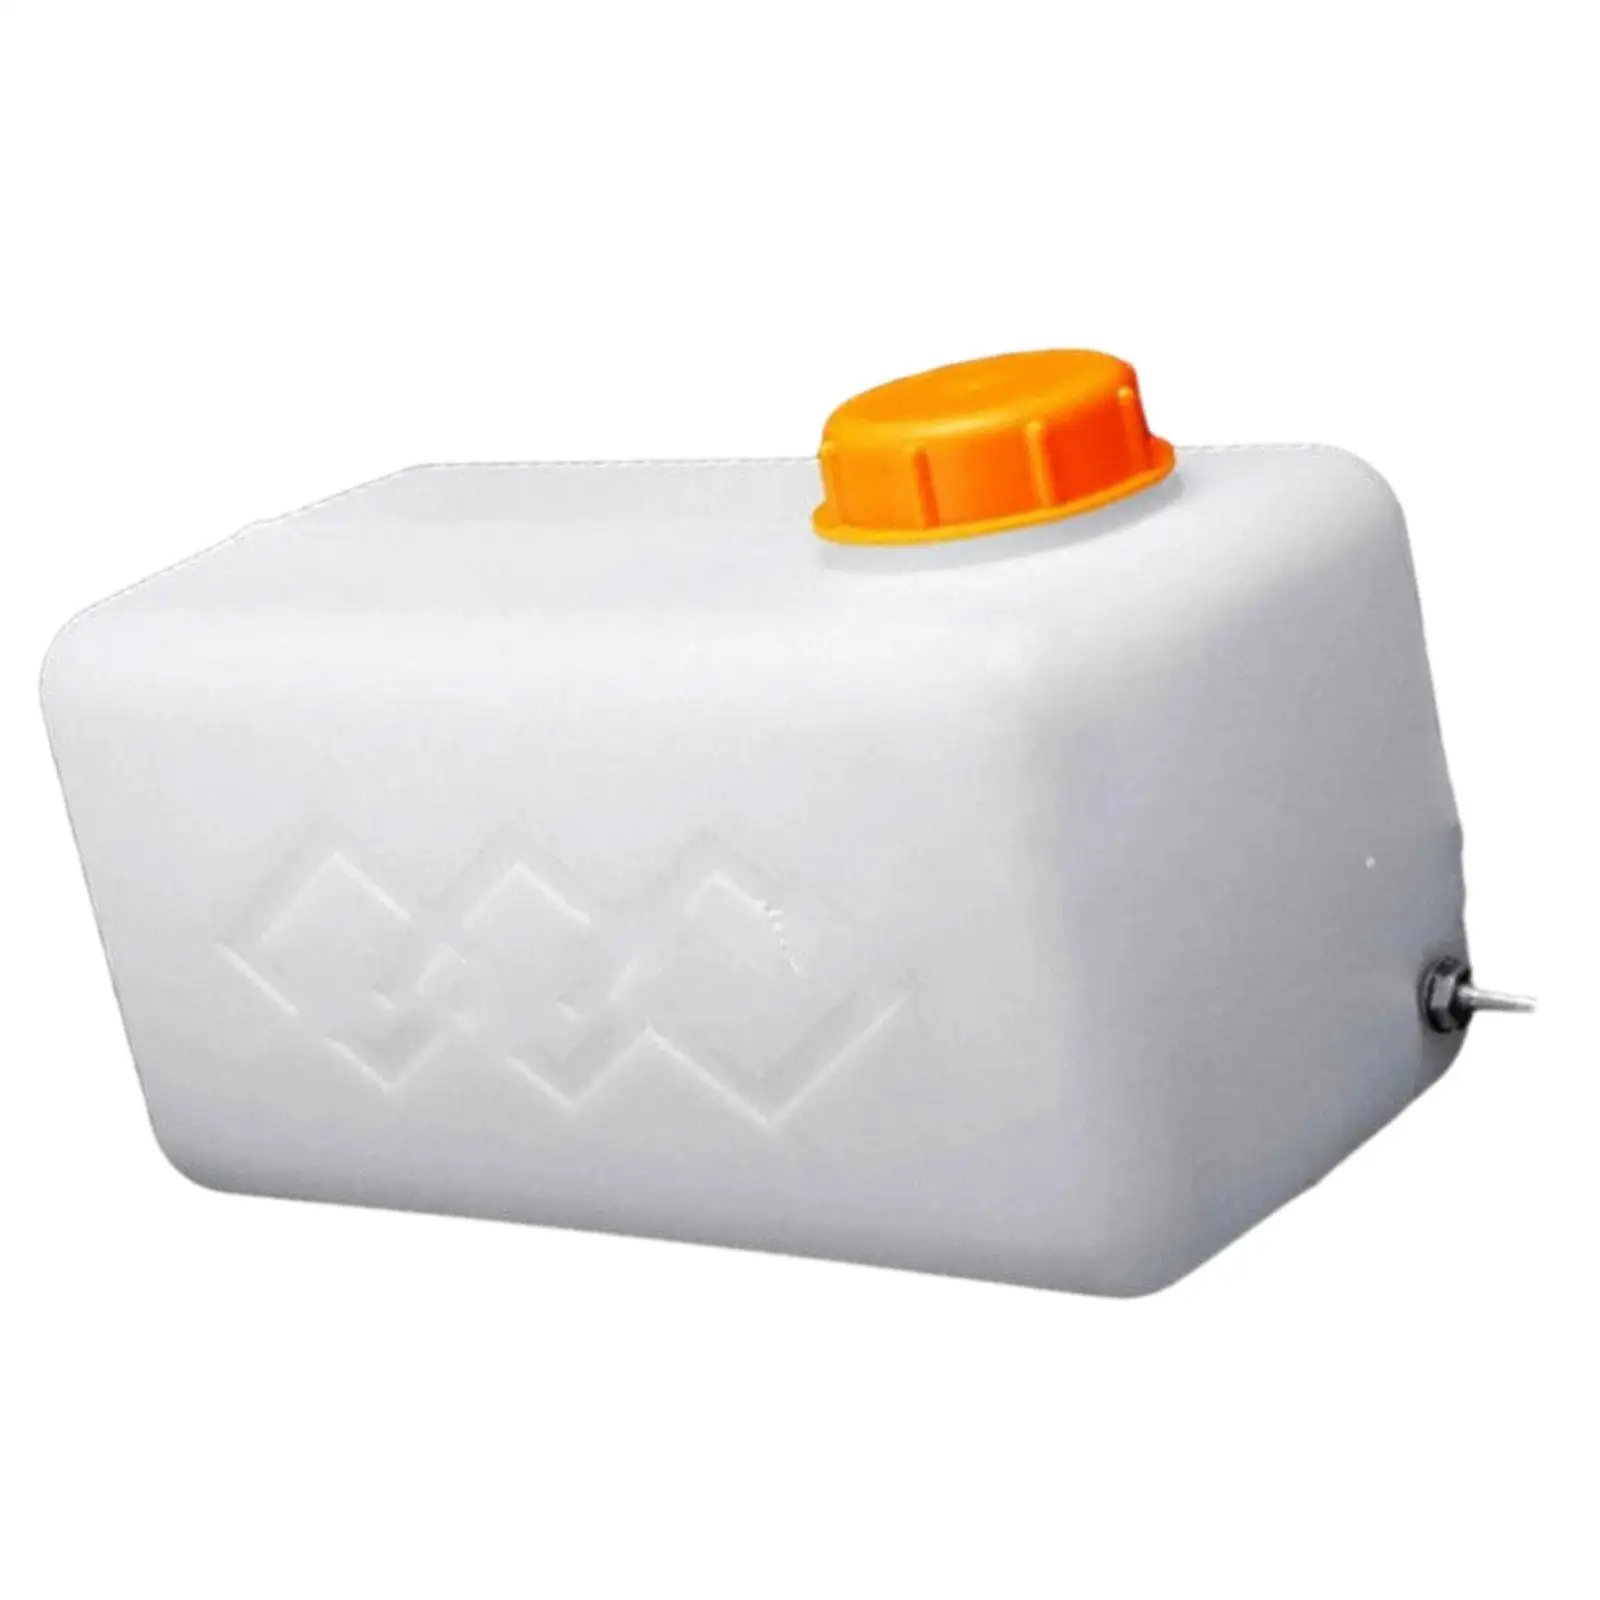 Parking Heater 5L Wear Resistant Container Jar Portable Gasoline Petrol Tank for